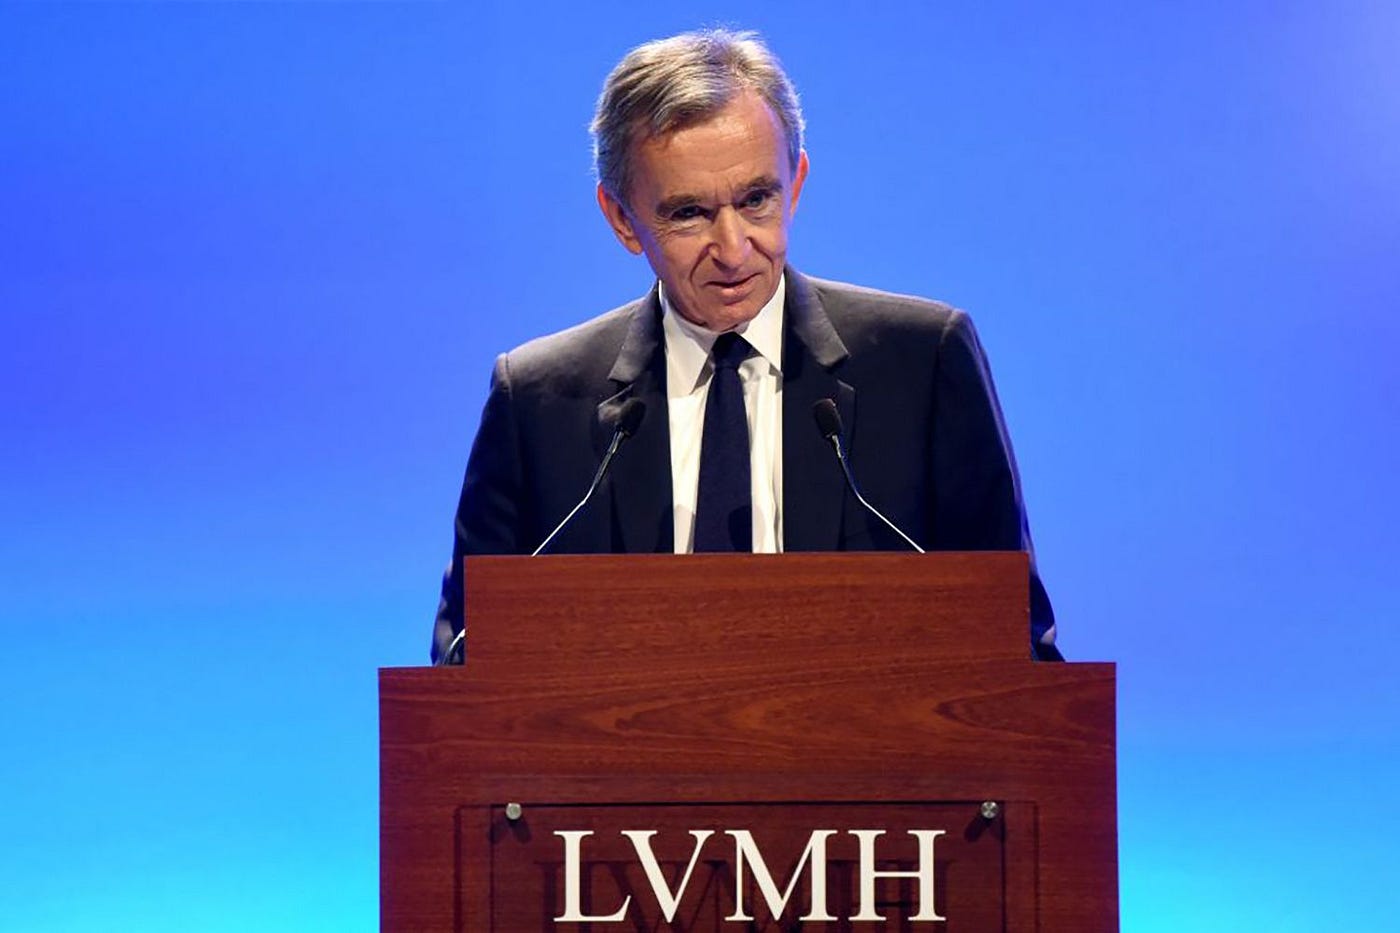 With Jeff dropping to 193 arnault is the new richest man in the world  bernard arnault